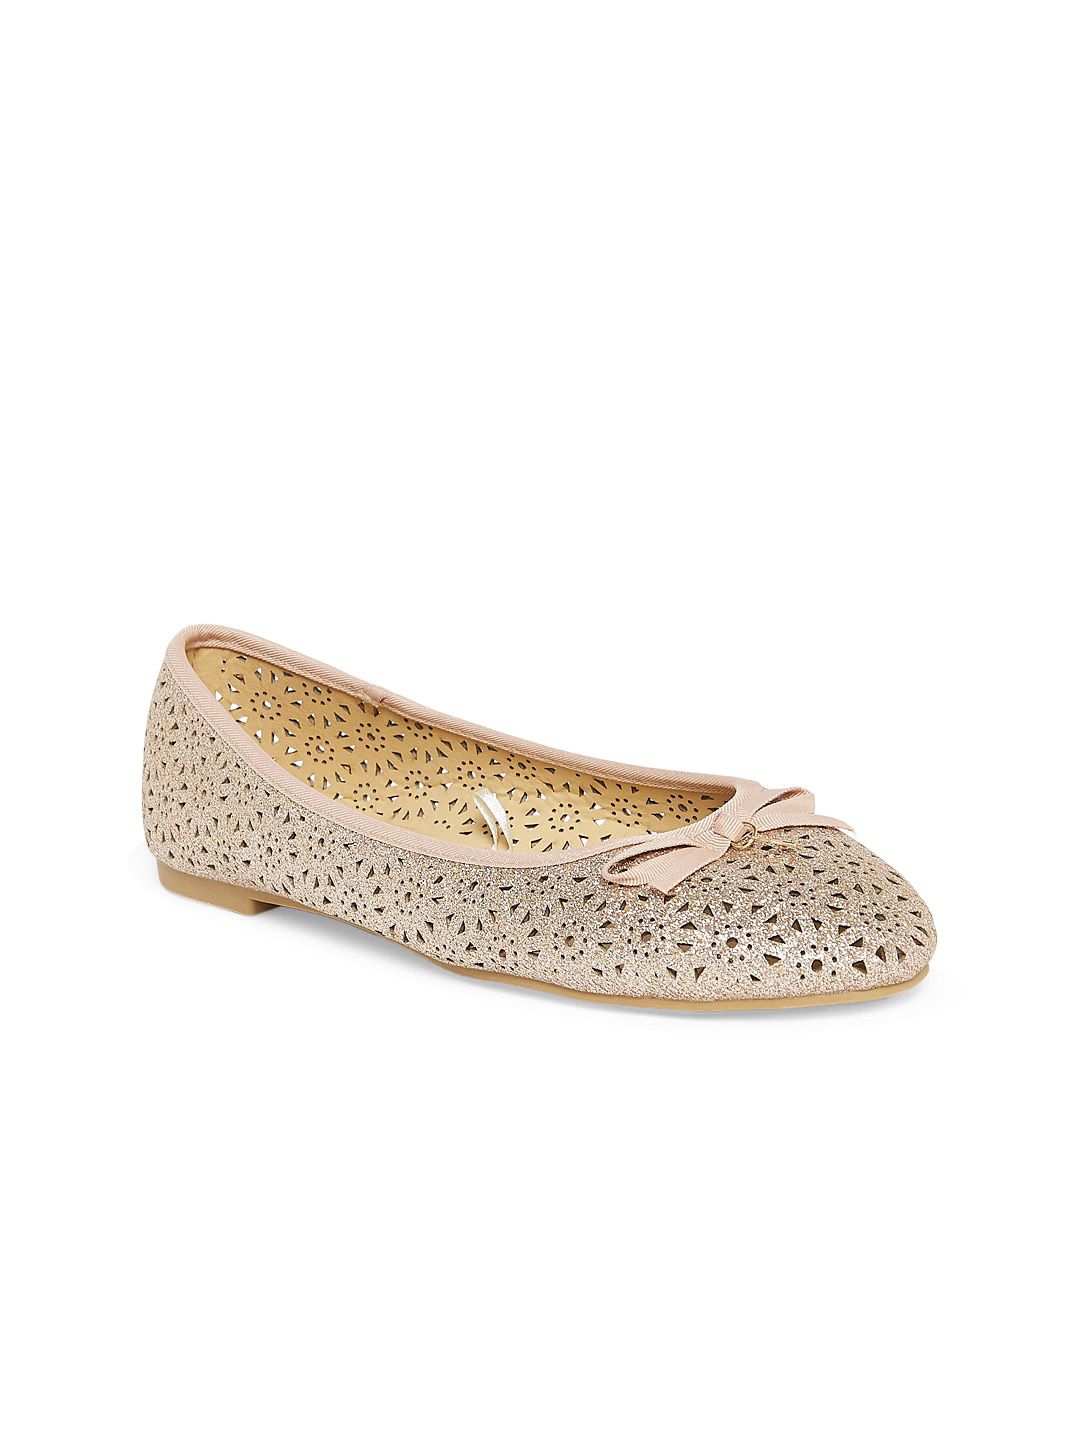 Forever Glam by Pantaloons Women Gold-Toned Embellished Ballerinas with Bows Flats Price in India